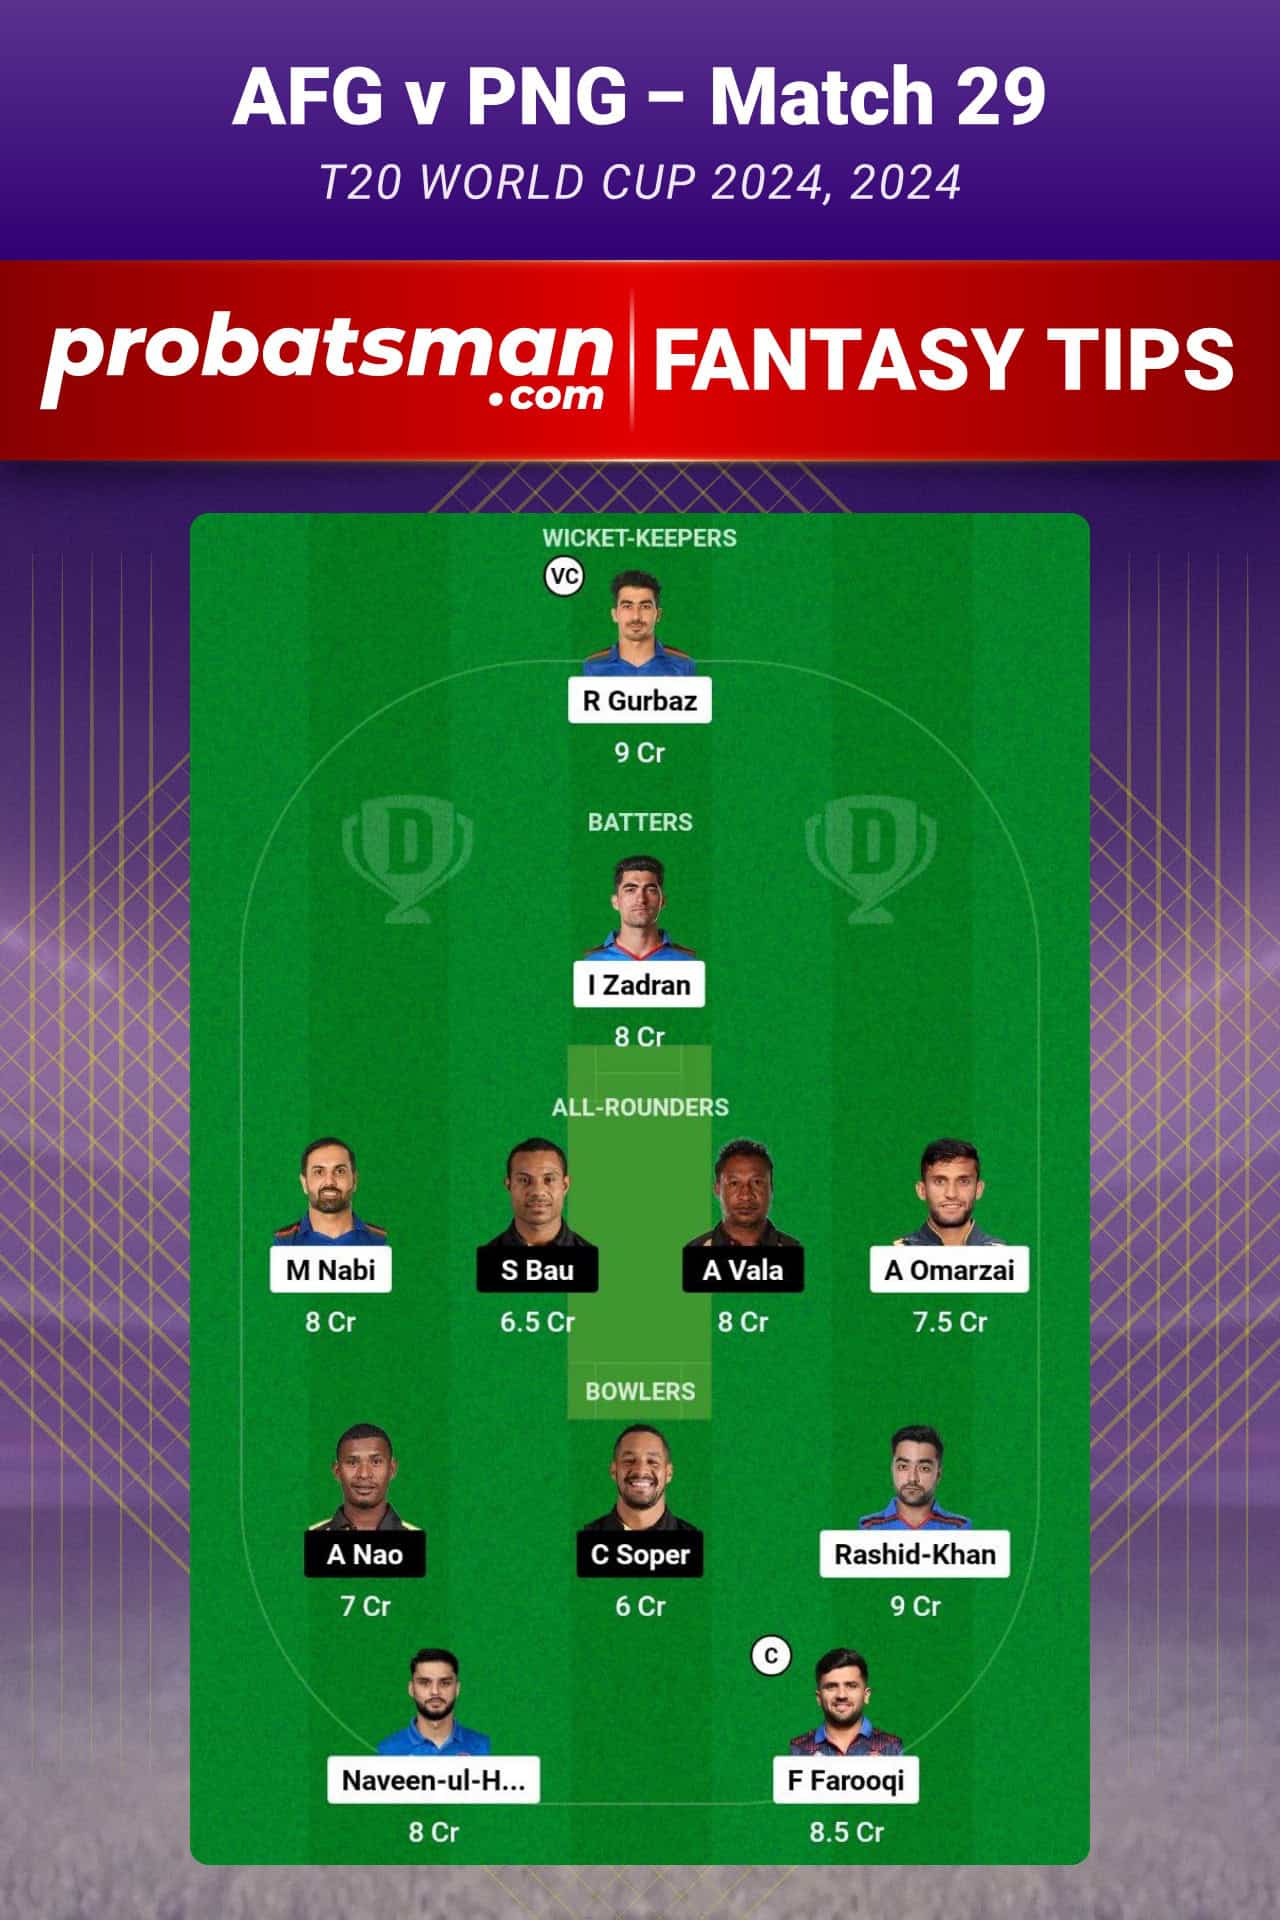 AFG vs PNG Dream11 Prediction For Match 29 of T20 World Cup 2024